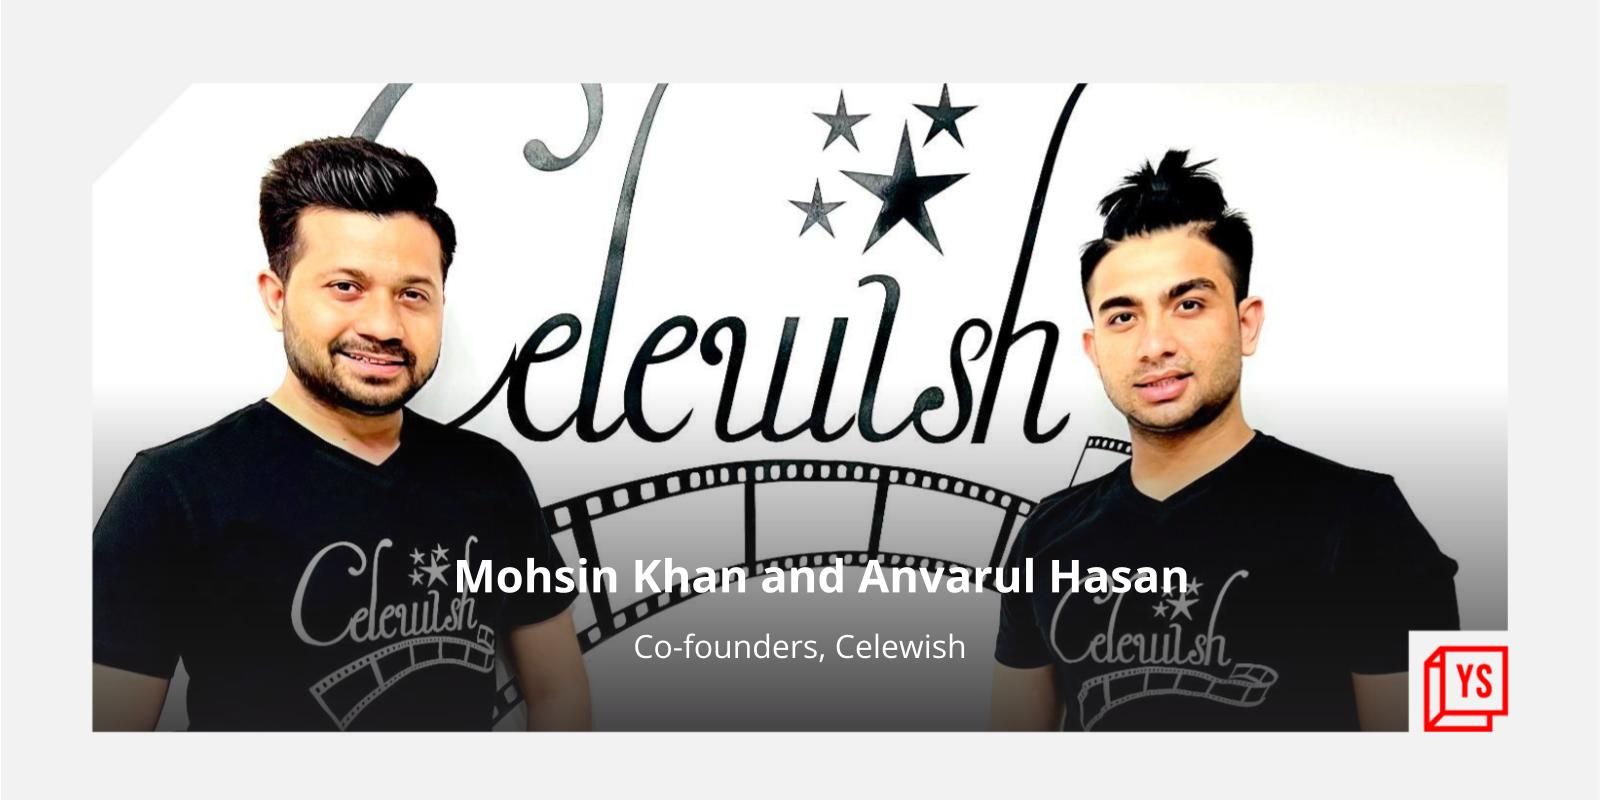 Meeting the stars: This Mumbai-based startup is helping fans connect with celebrities